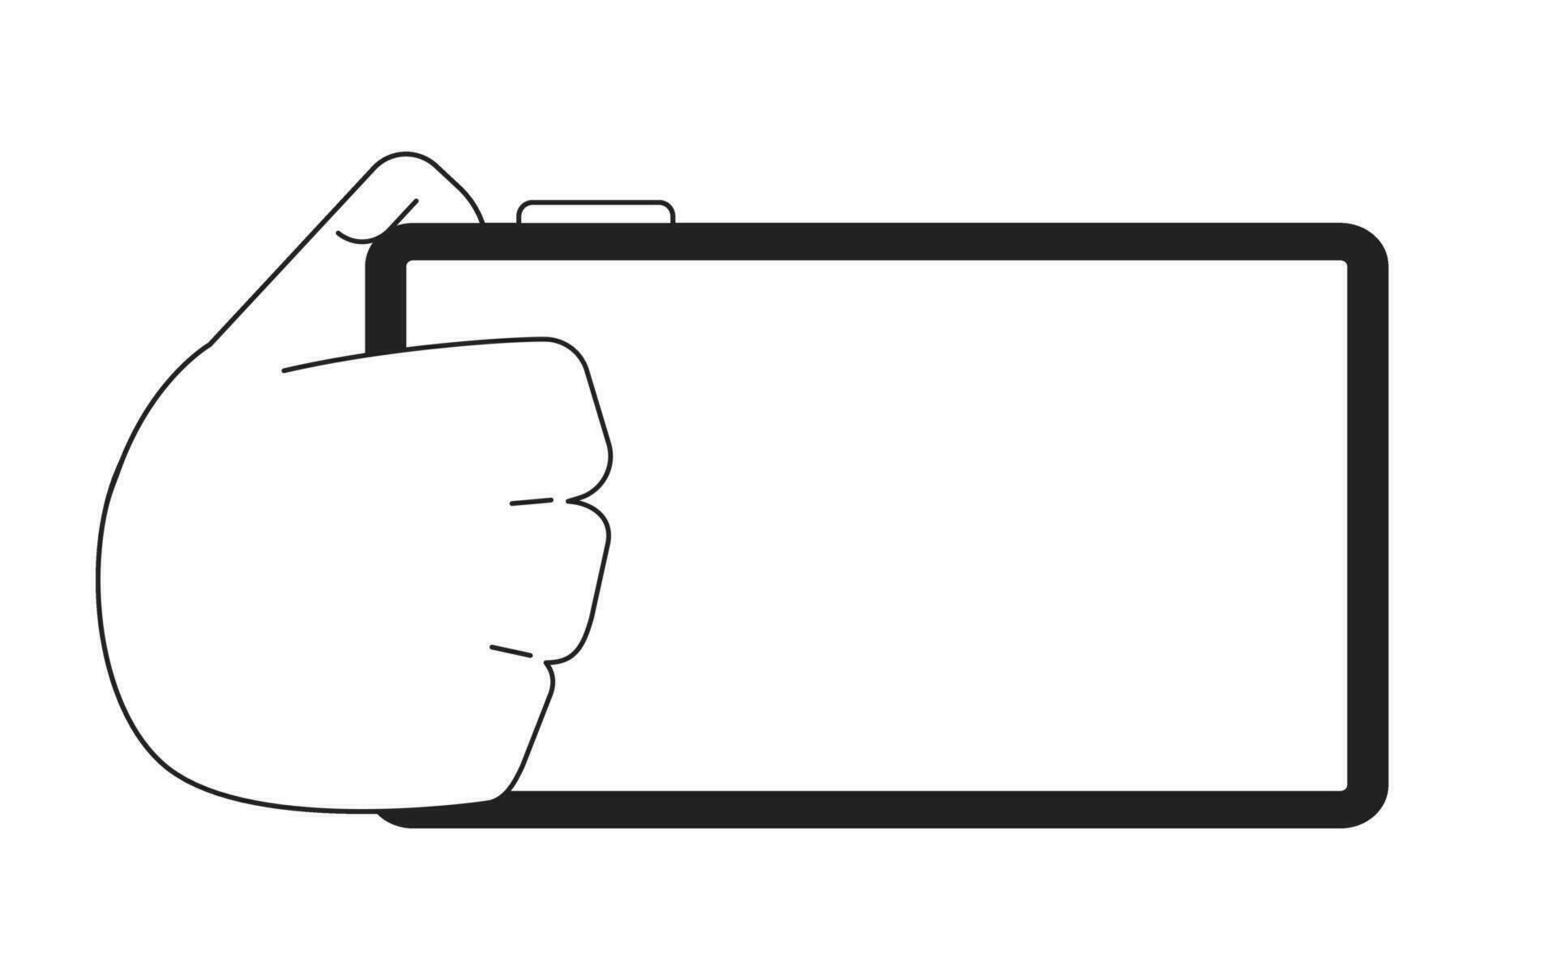 Holding smartphone monochrome flat vector hand. Mobile phone screen. Editable black and white thin line icon. Simple cartoon clip art spot illustration for web graphic design